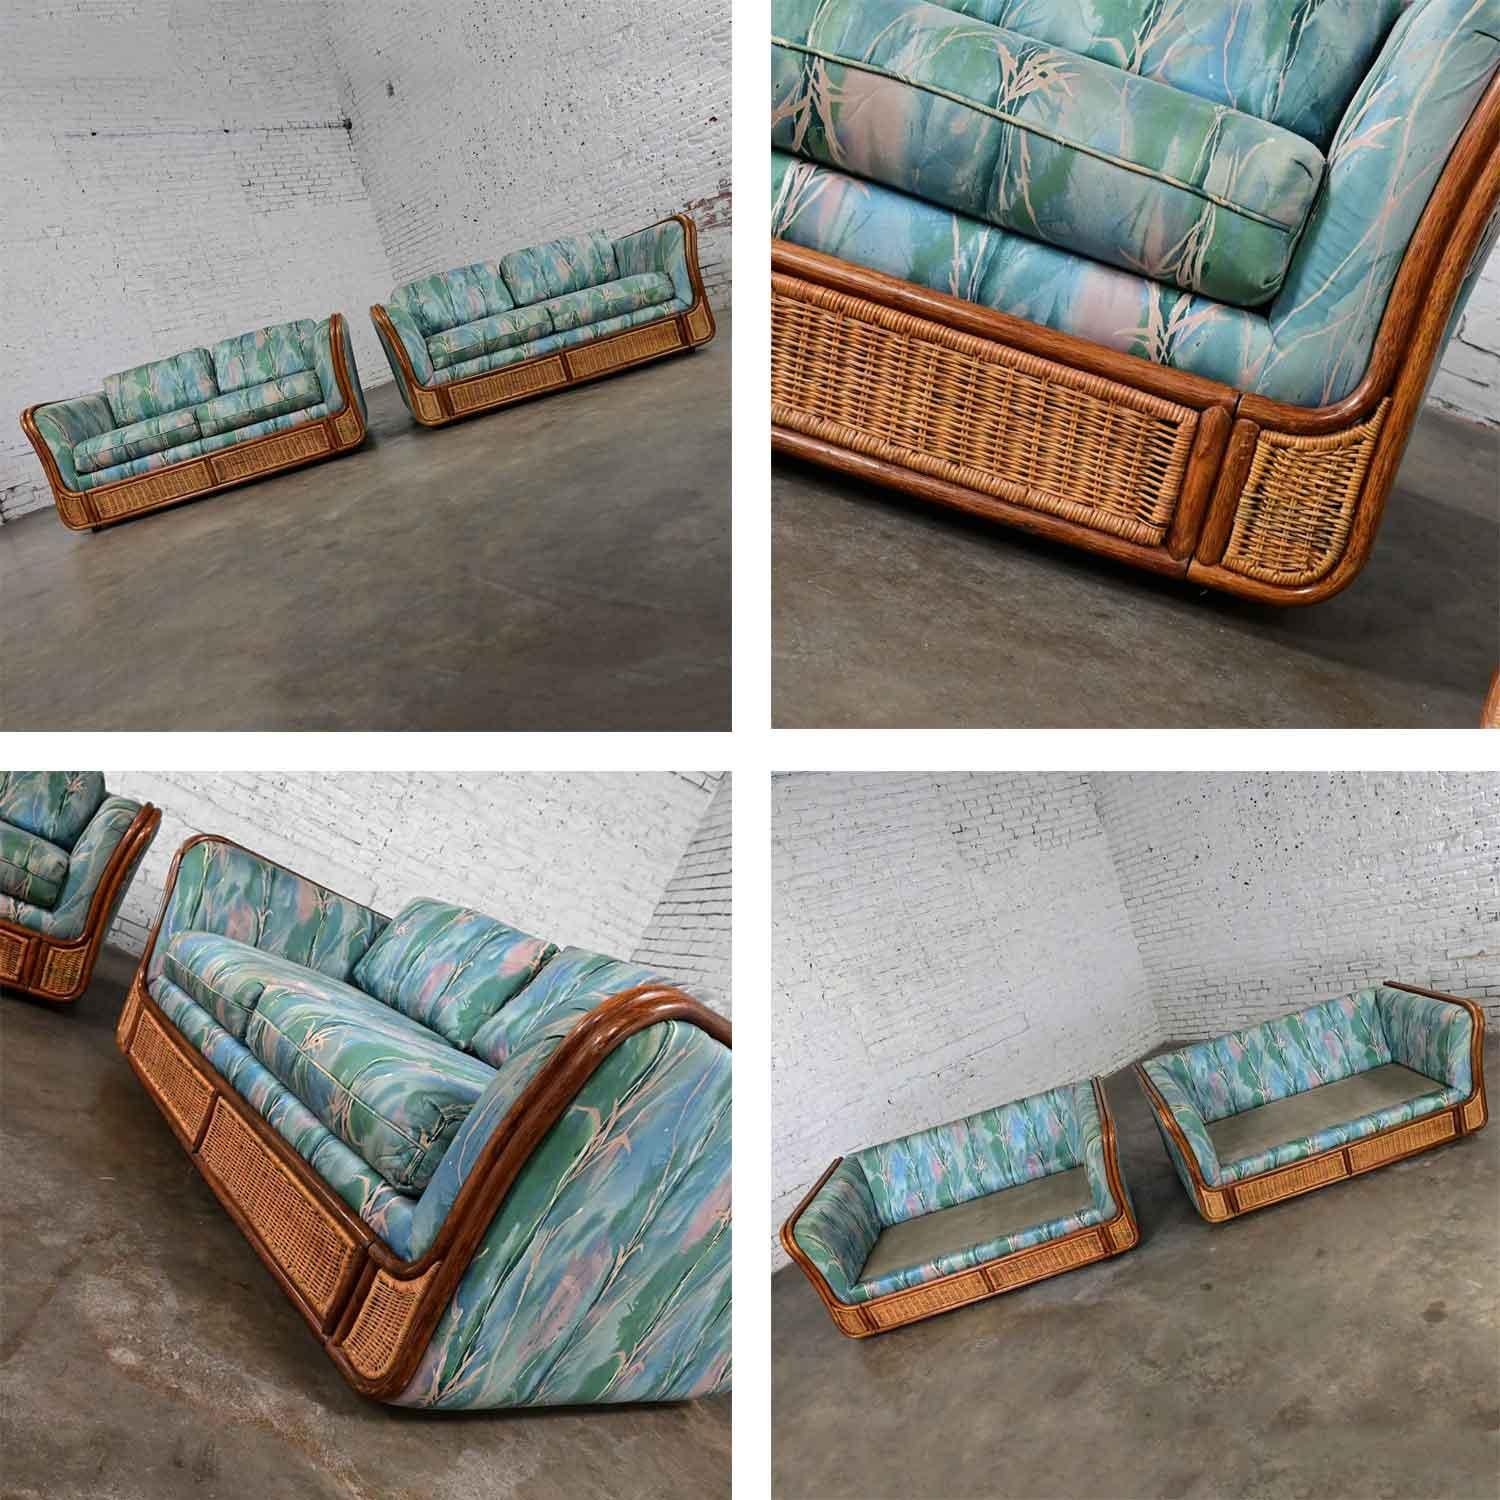 Late 20th Century Boho Chic Rattan & Wicker Tuxedo Style Upholstered Loveseats For Sale 4